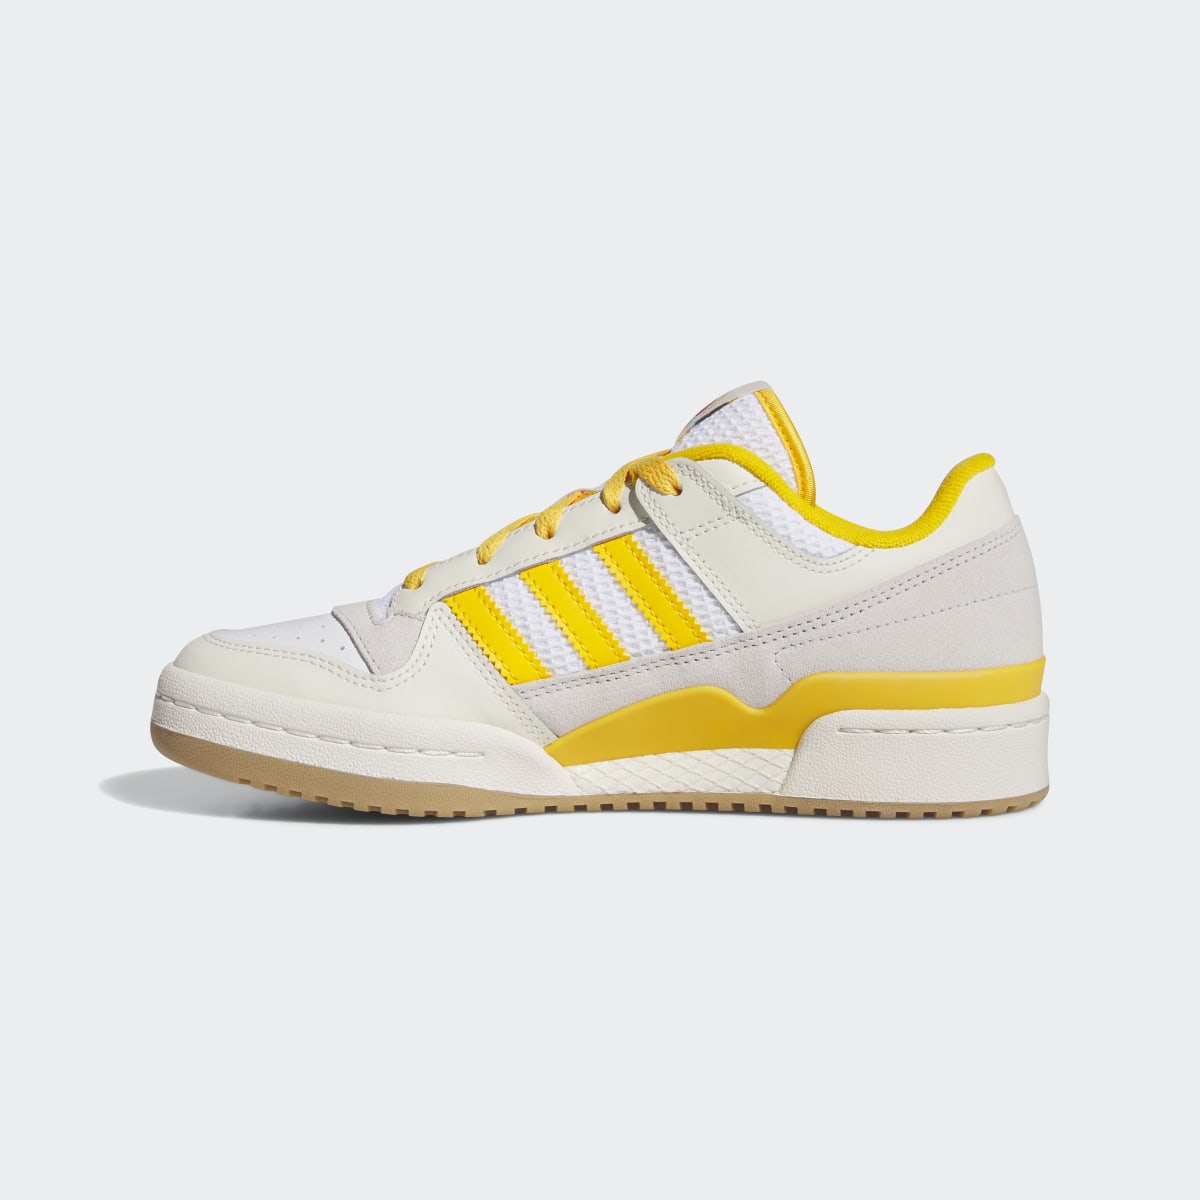 Adidas Forum Low Shoes. 11